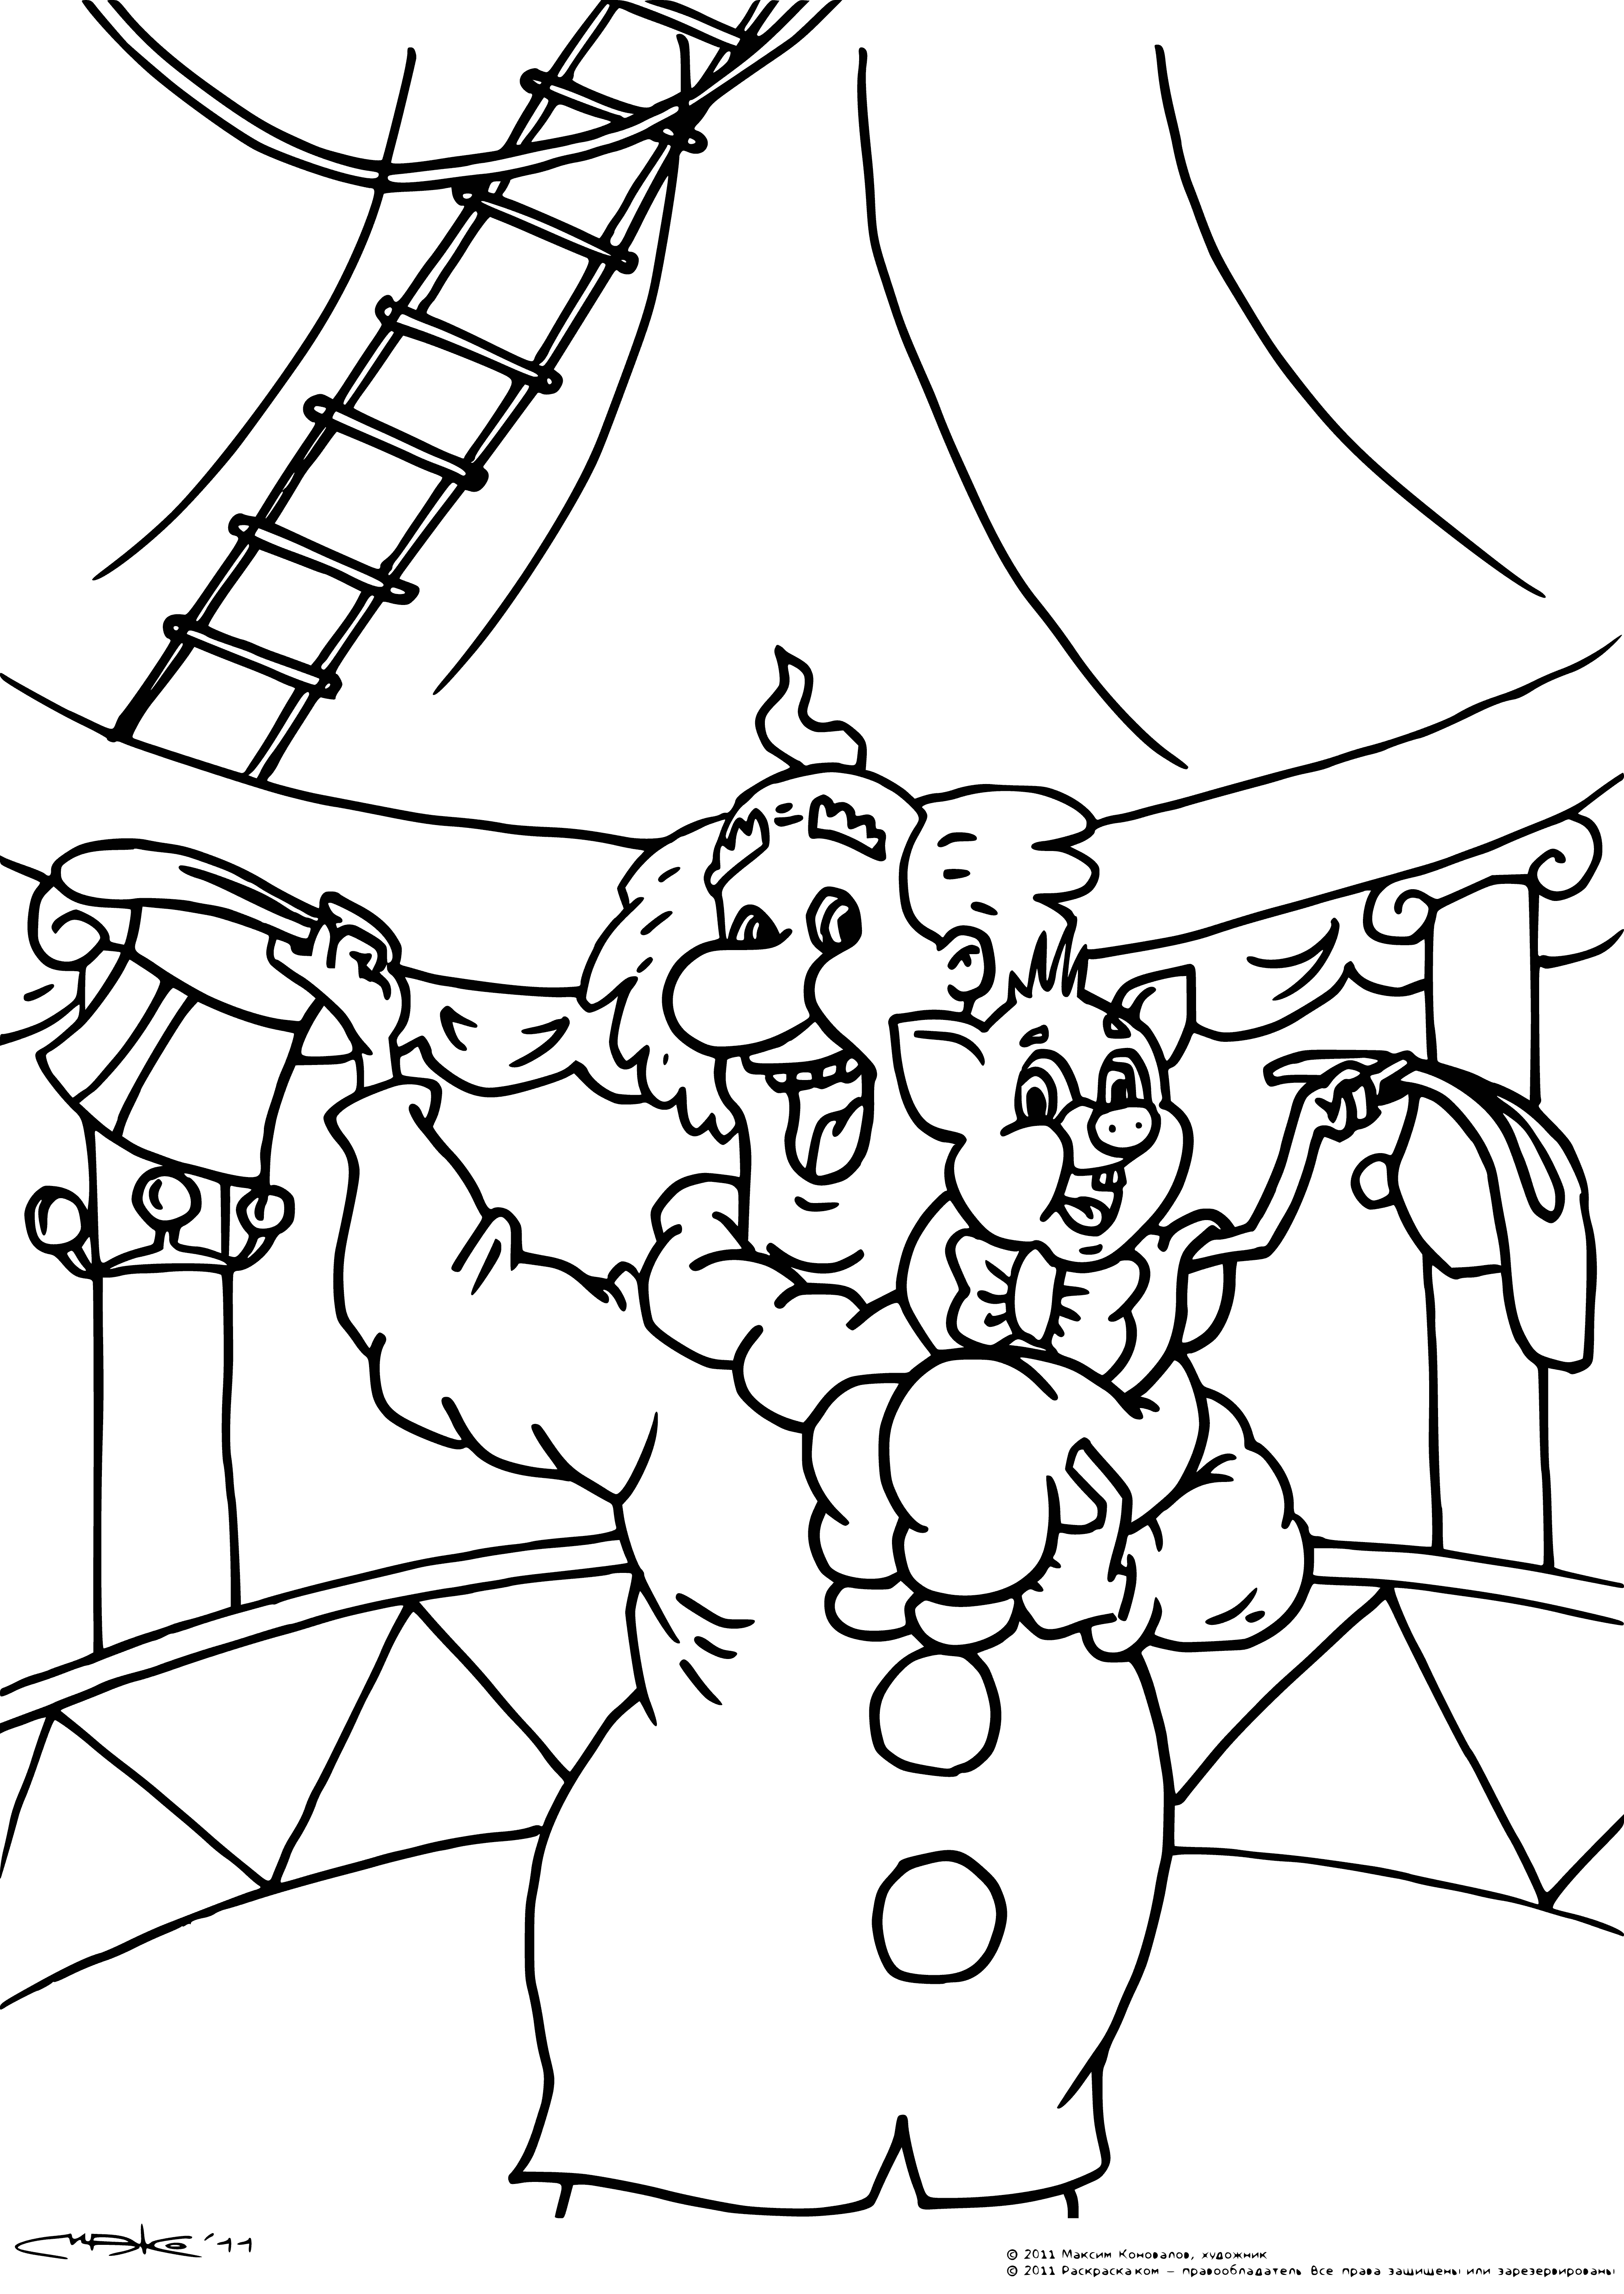 coloring page: Funtik and Mokus, two creatures with black eyes and orange noses, cuddle together in the center of a coloring page.